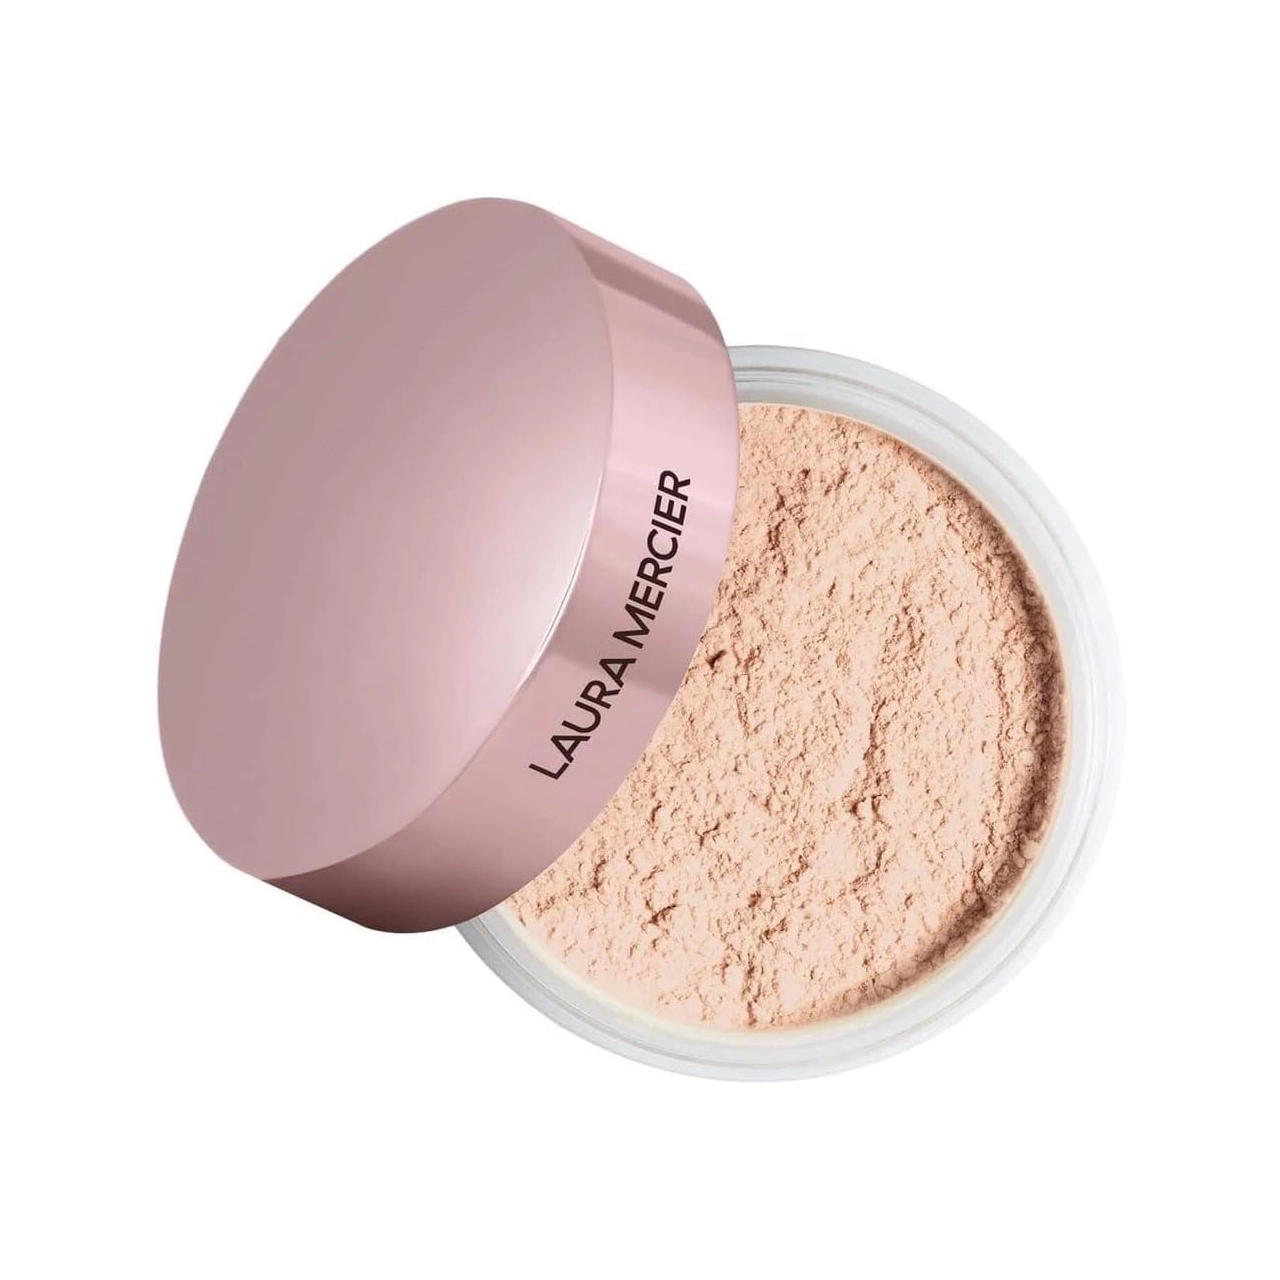 Laura Mercier Translucent Loose Setting Powder in its container against a white background